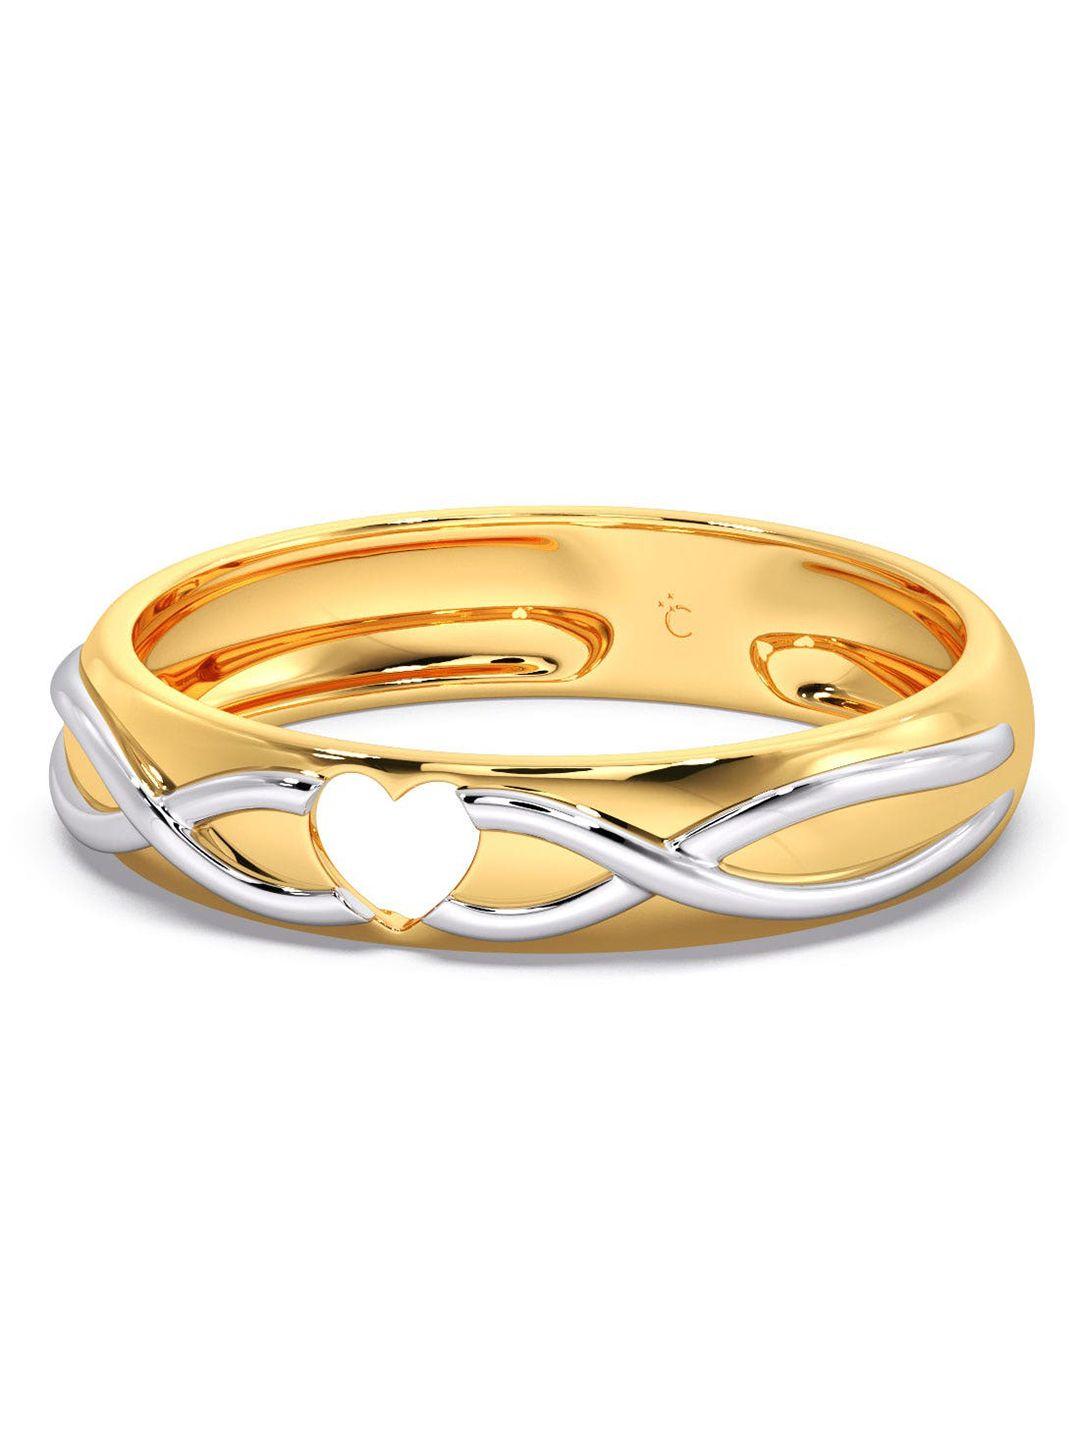 candere a kalyan jewellers company 18kt gold heart ring-2.27gm